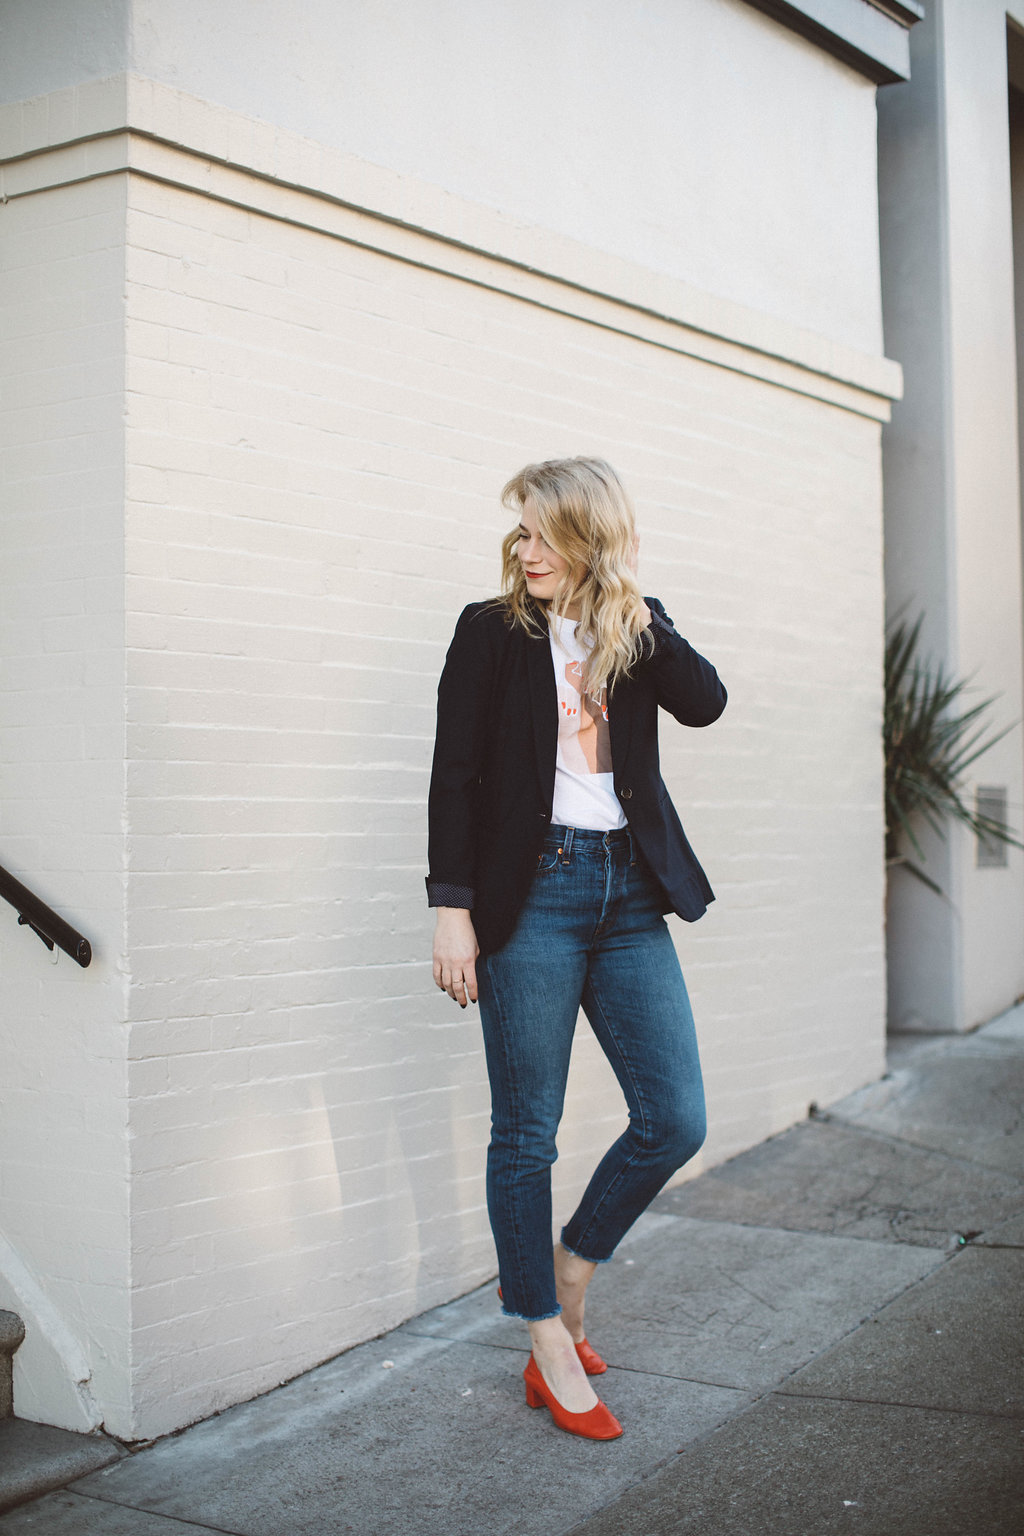 For All Womankind Tee worn with Levi's Wedgie Jeans, a J. Crew Blazer and Everlane Day Heels.